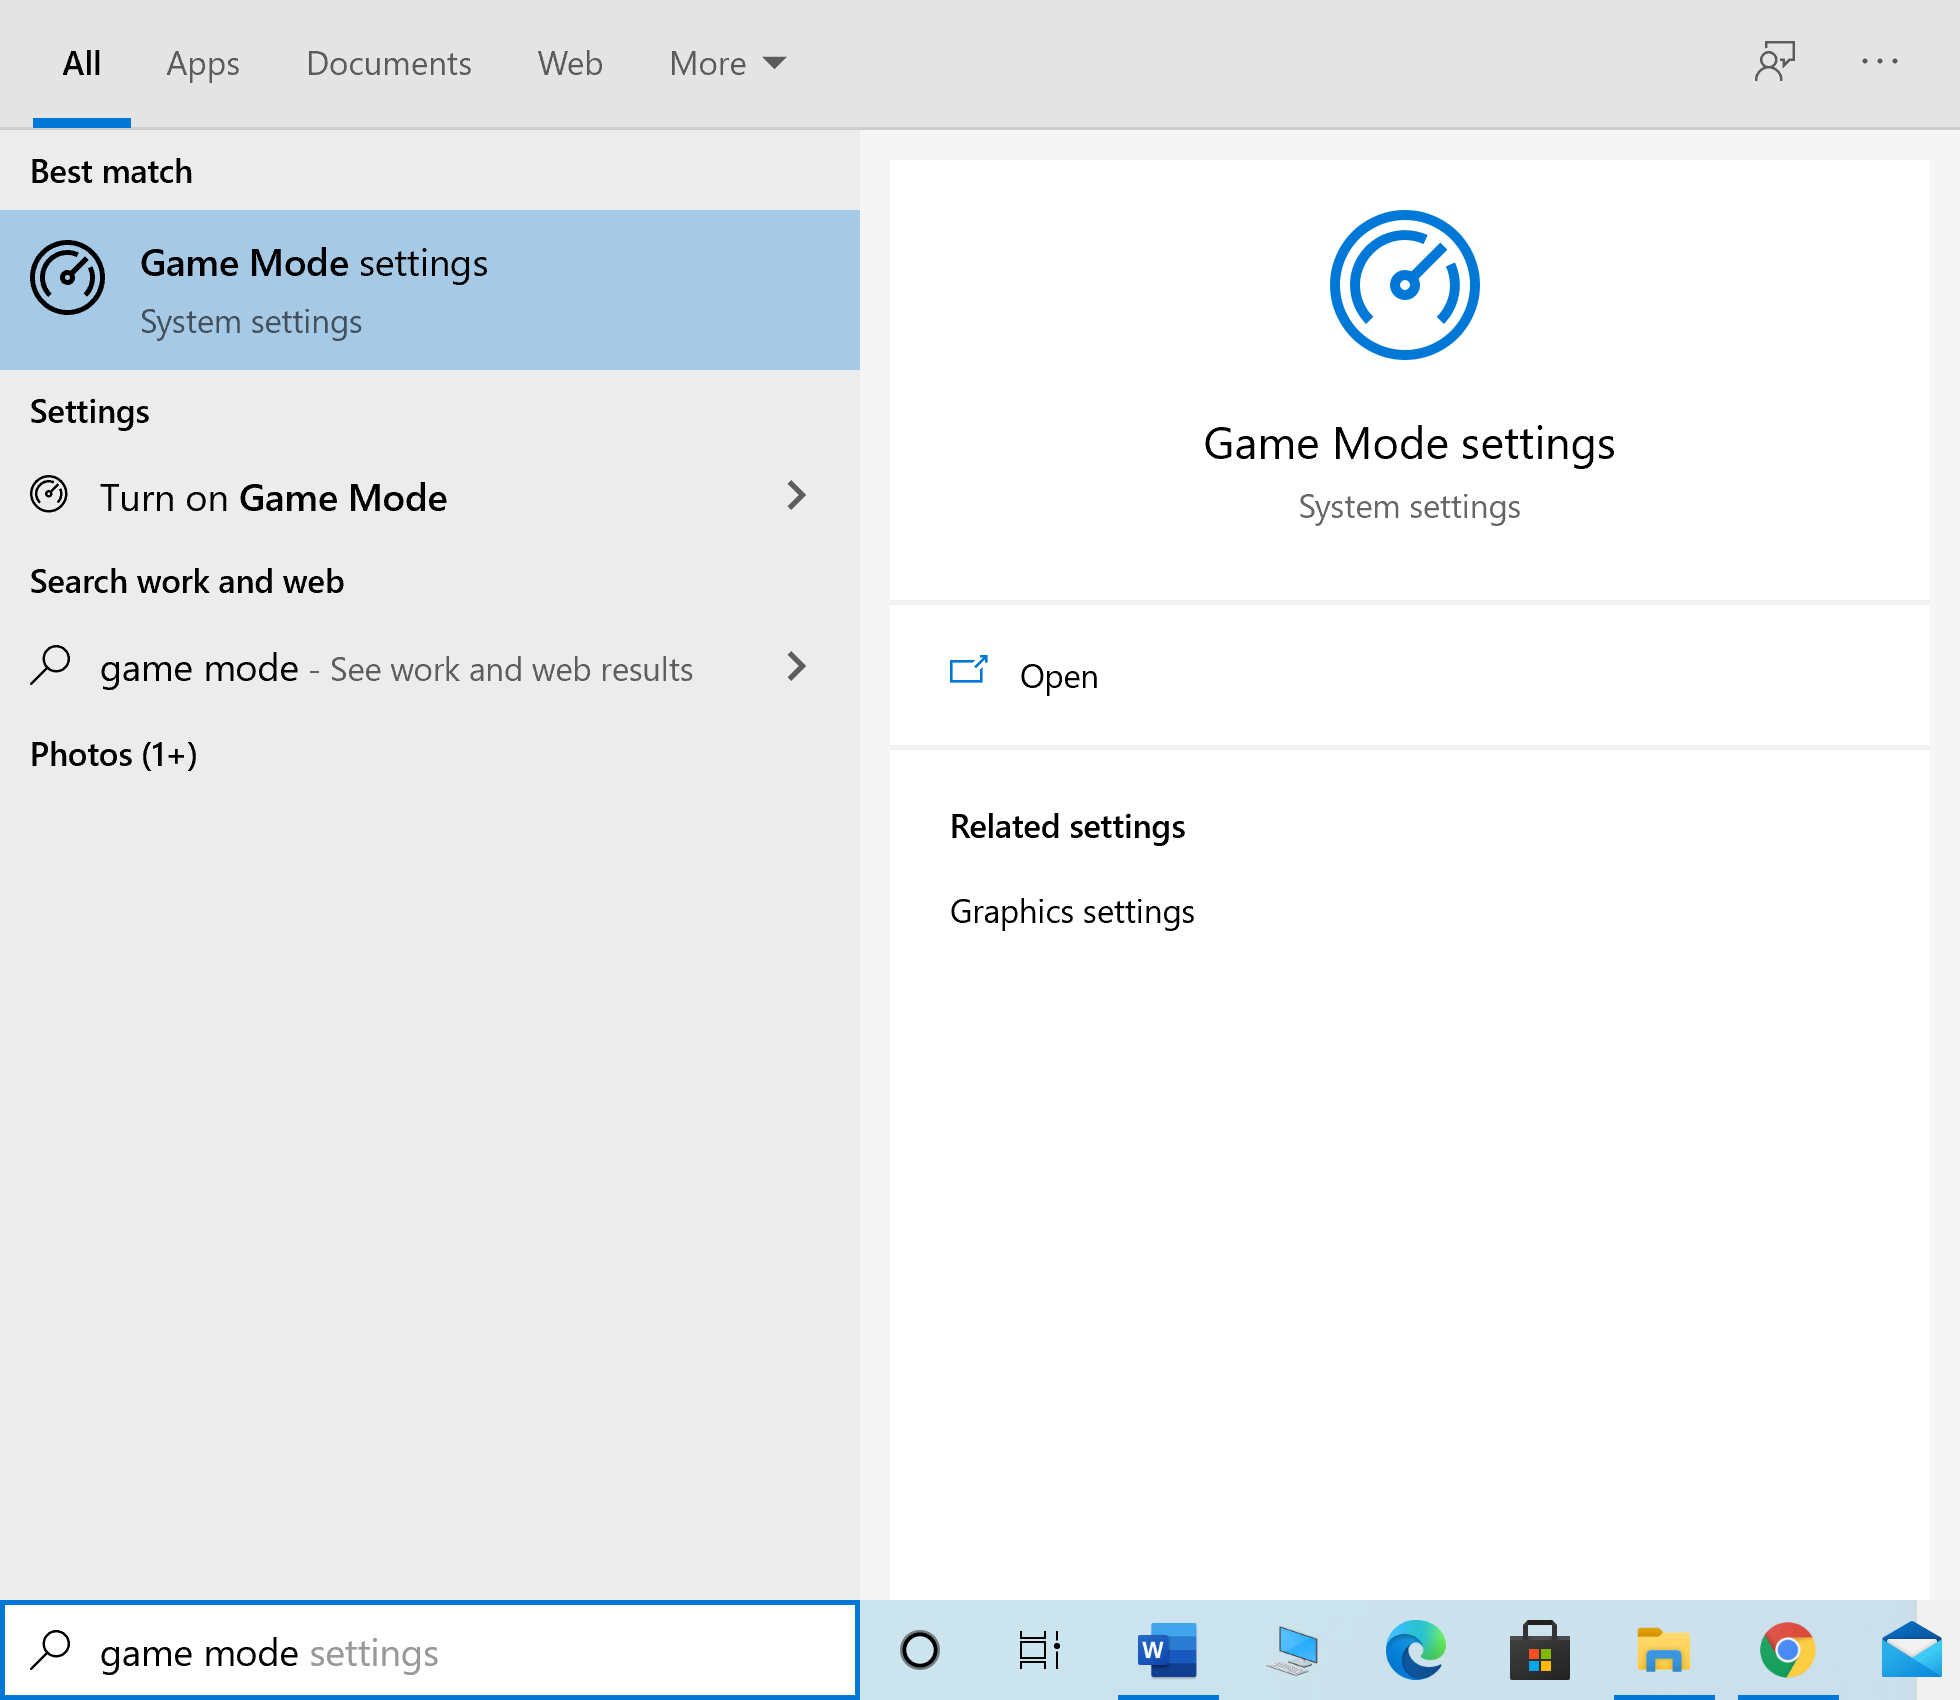 Type Game mode settings into Windows search and launch it from the search result